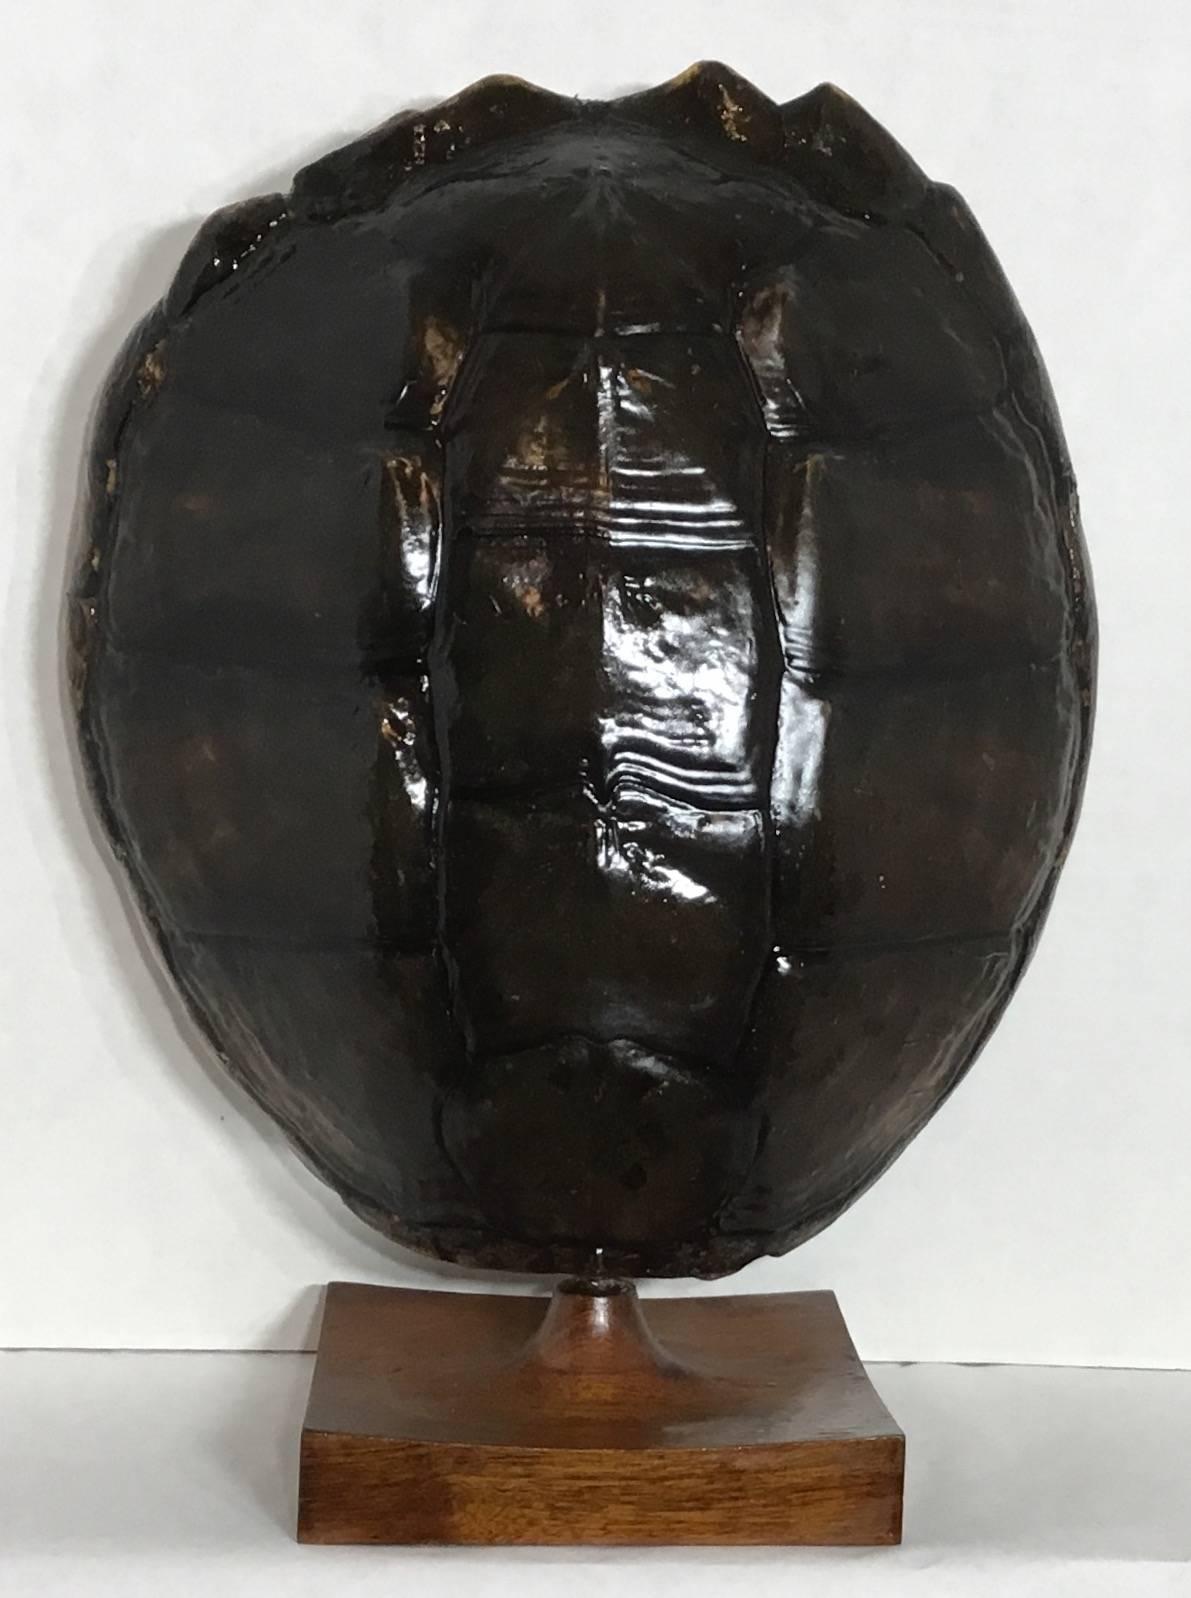 Beautiful turtle shell mounted on a wood base, clean and seal with clear resin
In the front and professionally linen upholstered in the back, great decorative 
Object in the room.